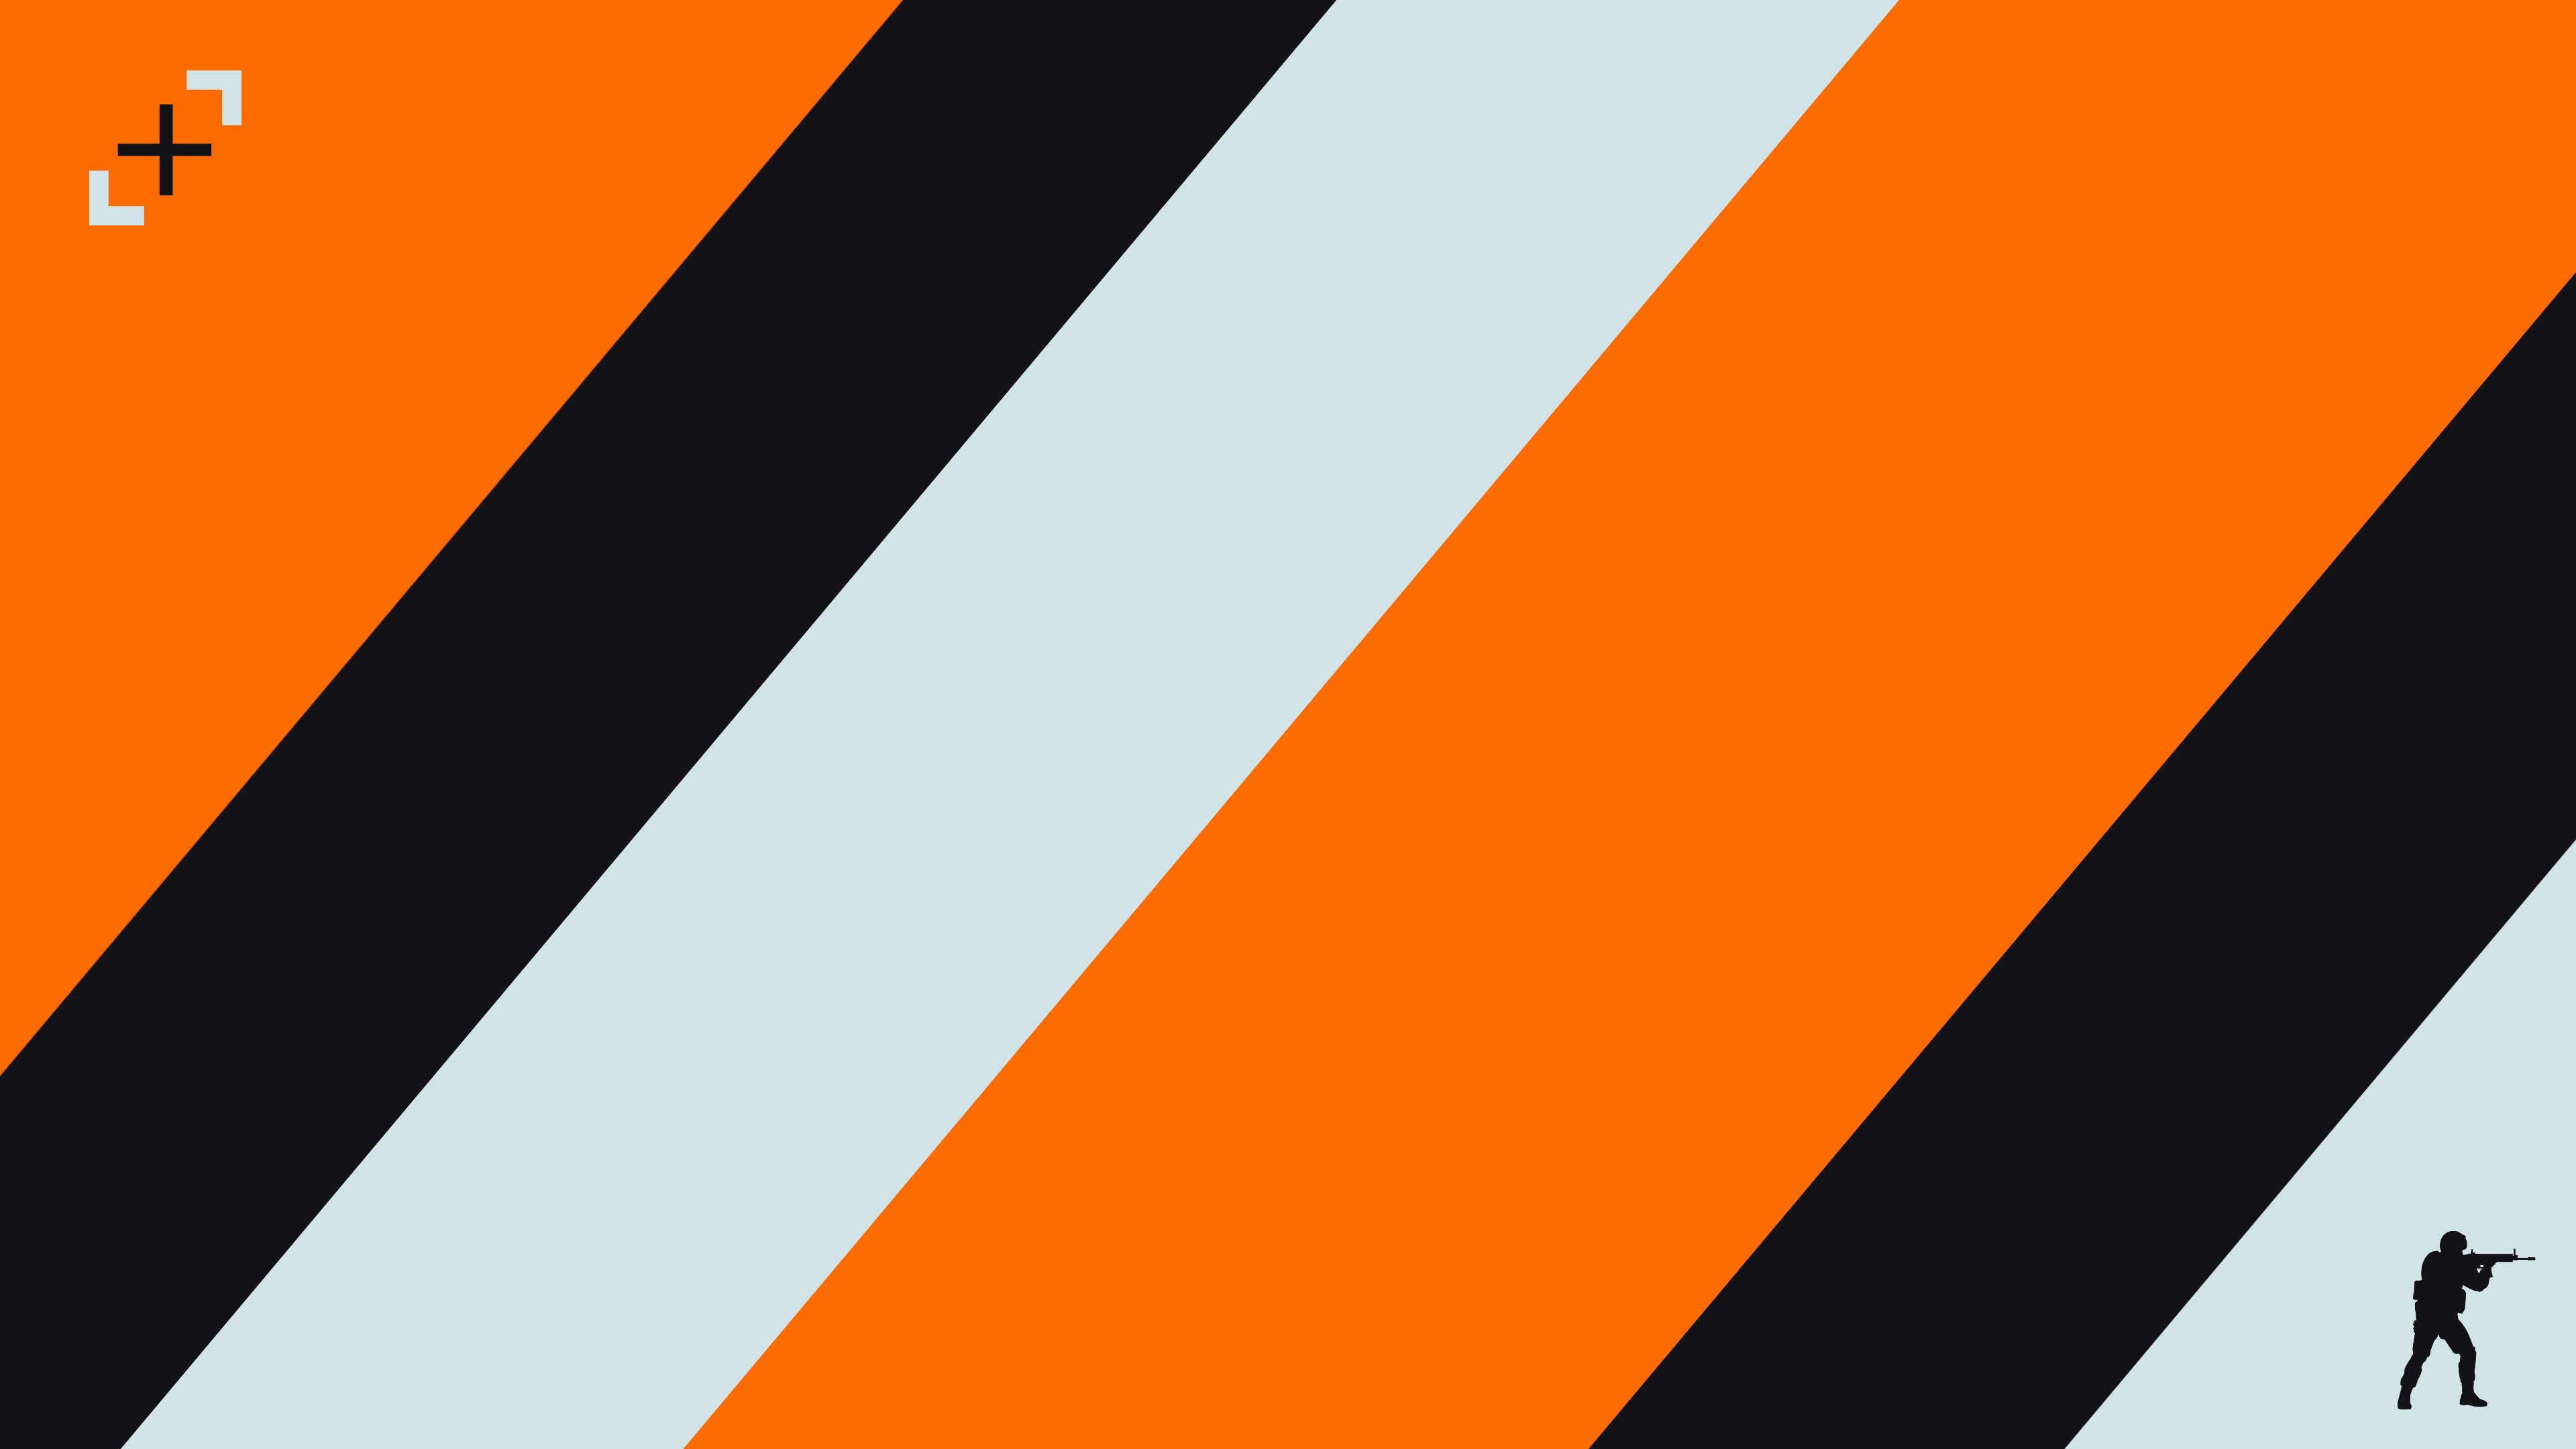 3840x2160 Saw an Asiimov wallpaper by seraph-dA-k1ng, decided to make my own -  minimalist ...